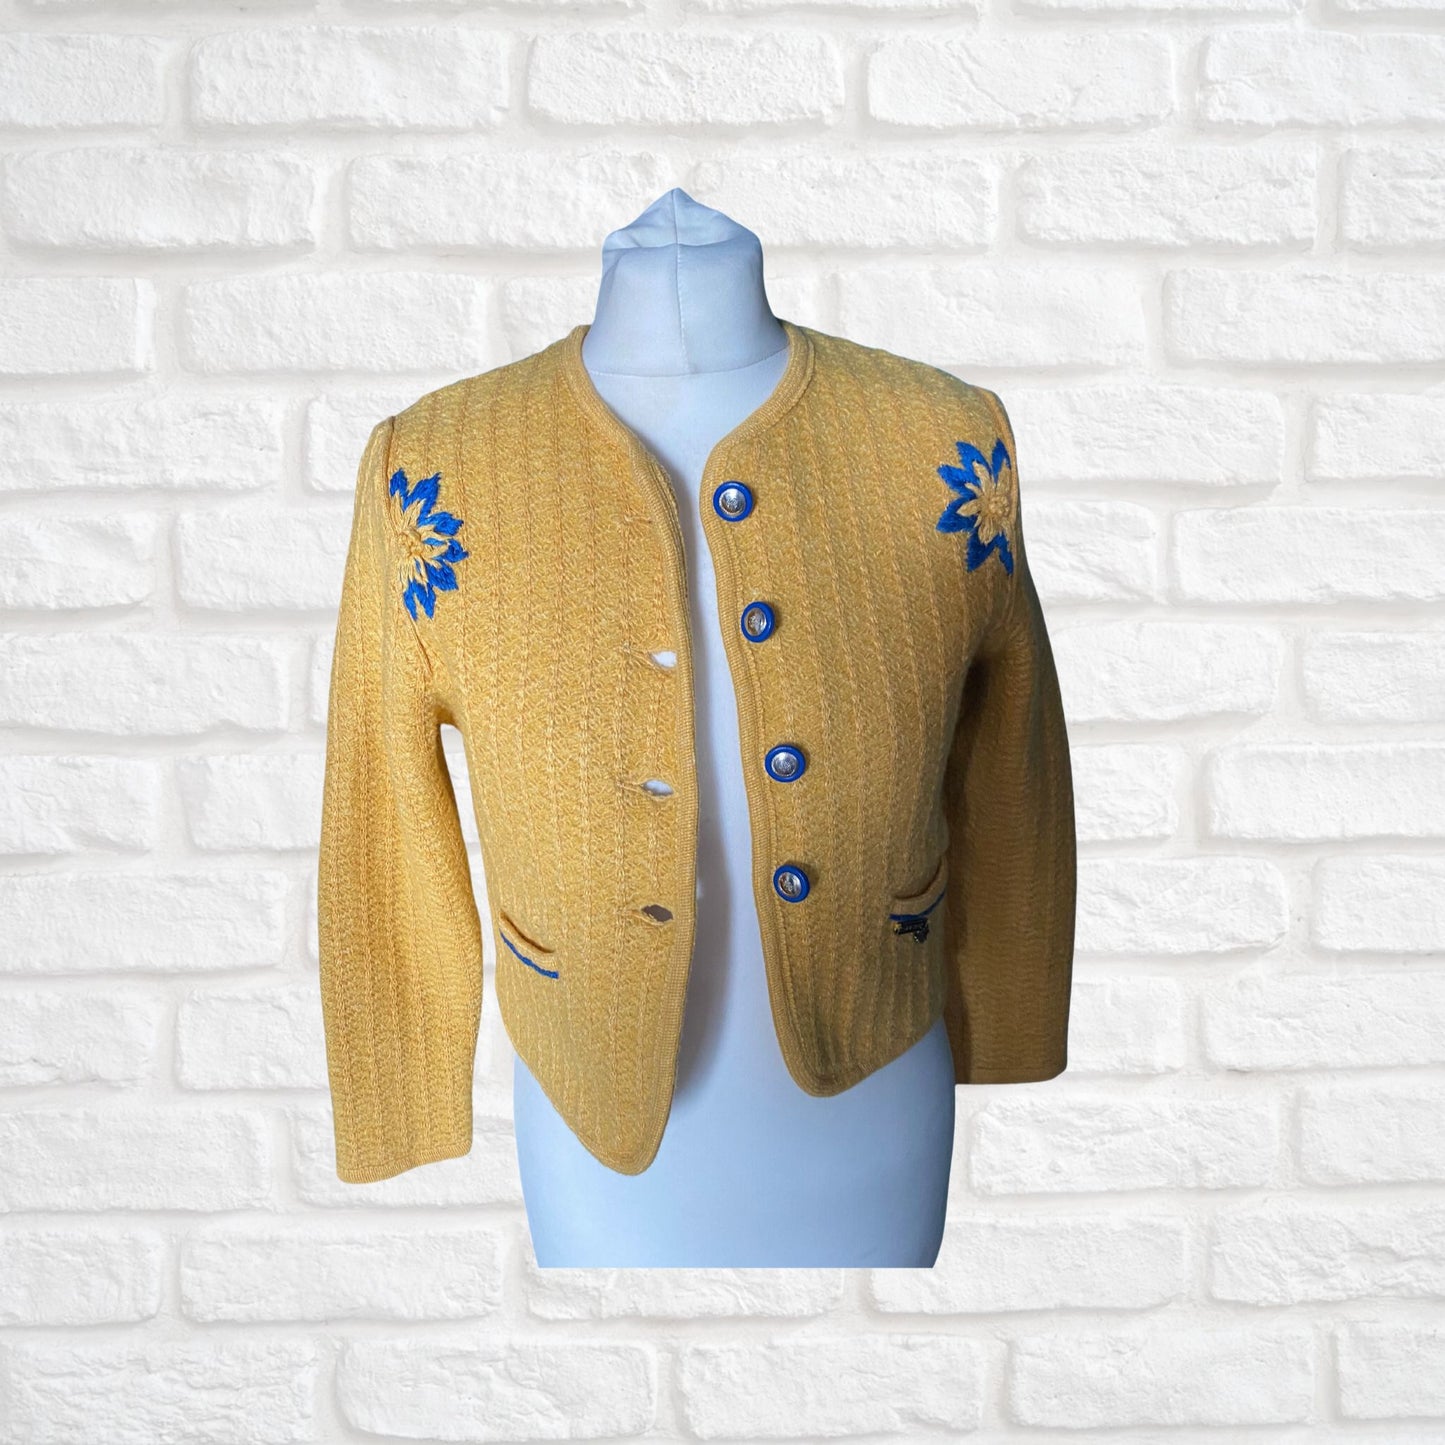 Vintage Yellow Cropped Cardigan with embroidered blue  flower motif. Approx UK size 8-10